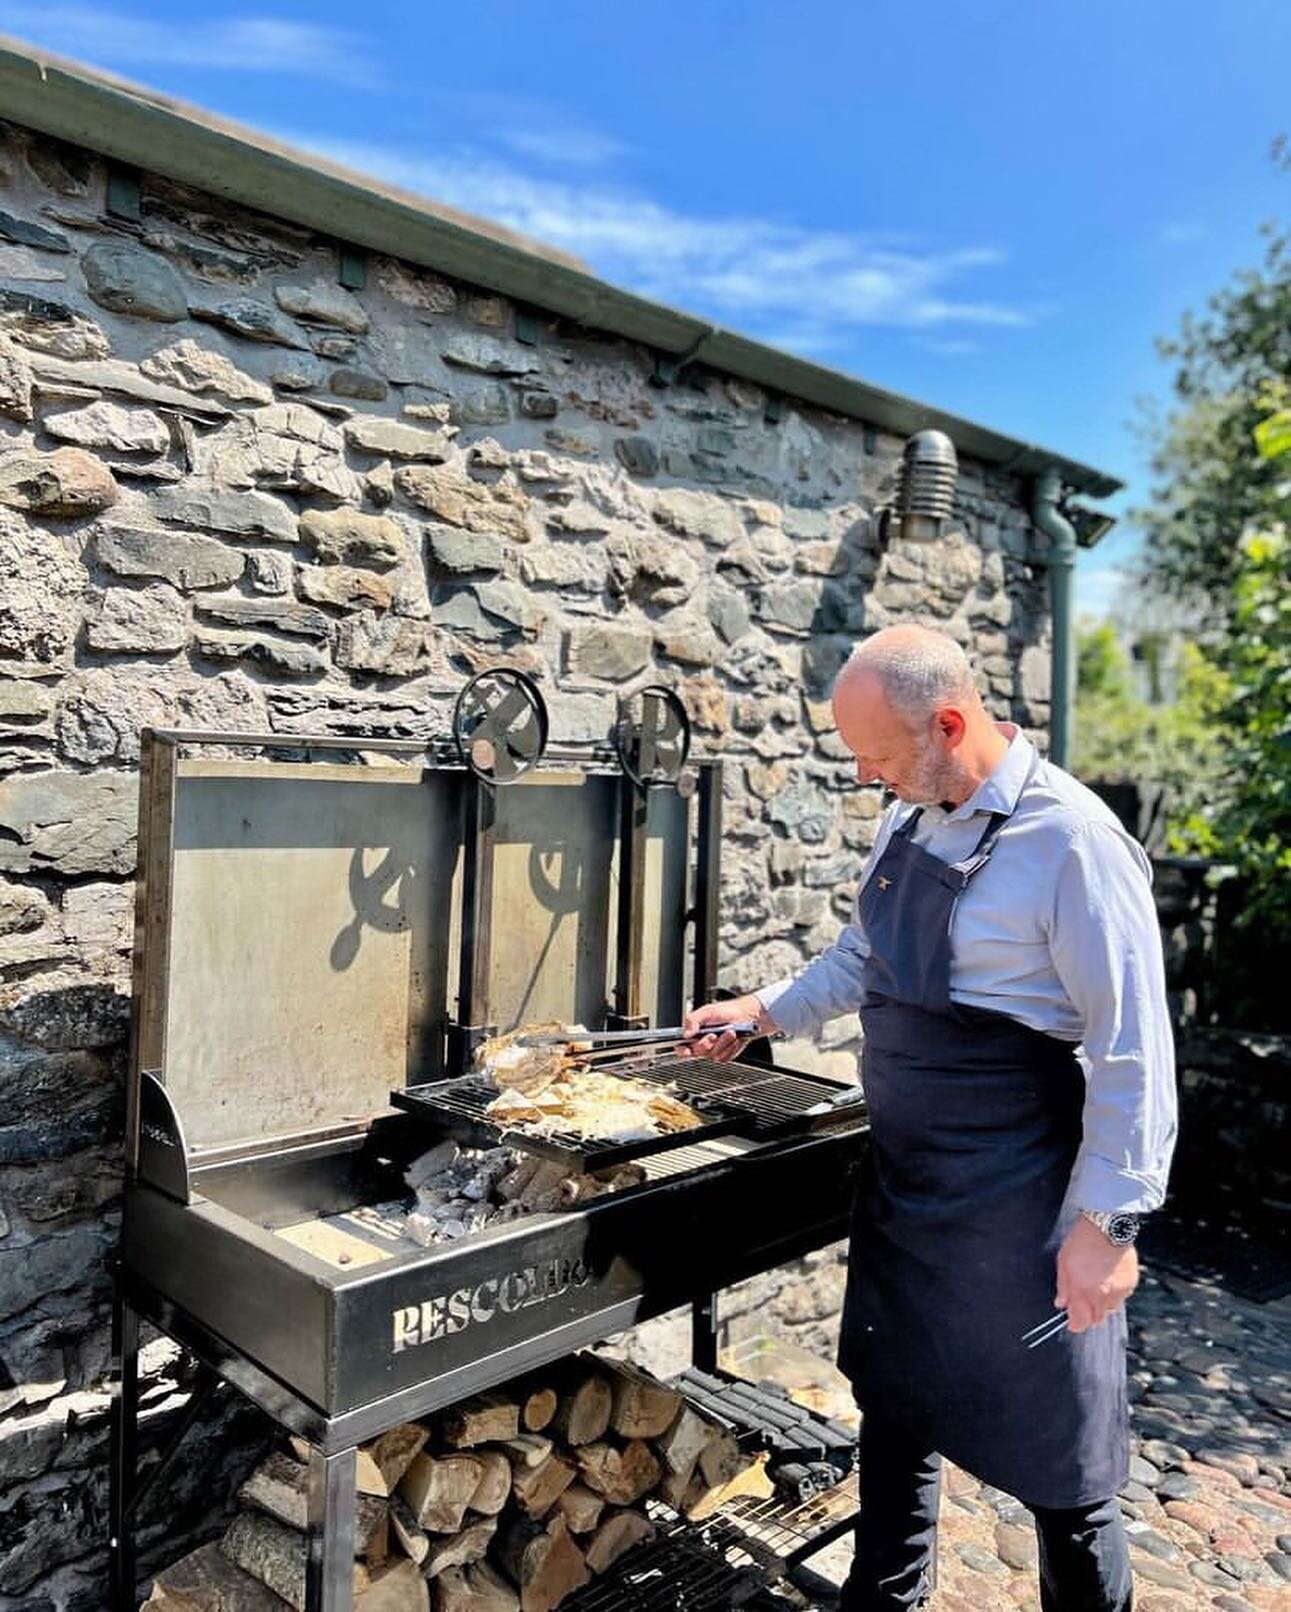 Really proud to supply @lenclume  and @rogan_simon with one of our &lsquo;parrilla twin&rsquo; grills. They are so versatile and they can be enjoyed by anybody at home as well as some of the worlds greatest chefs! Visit www.rescoldo.com while we stil